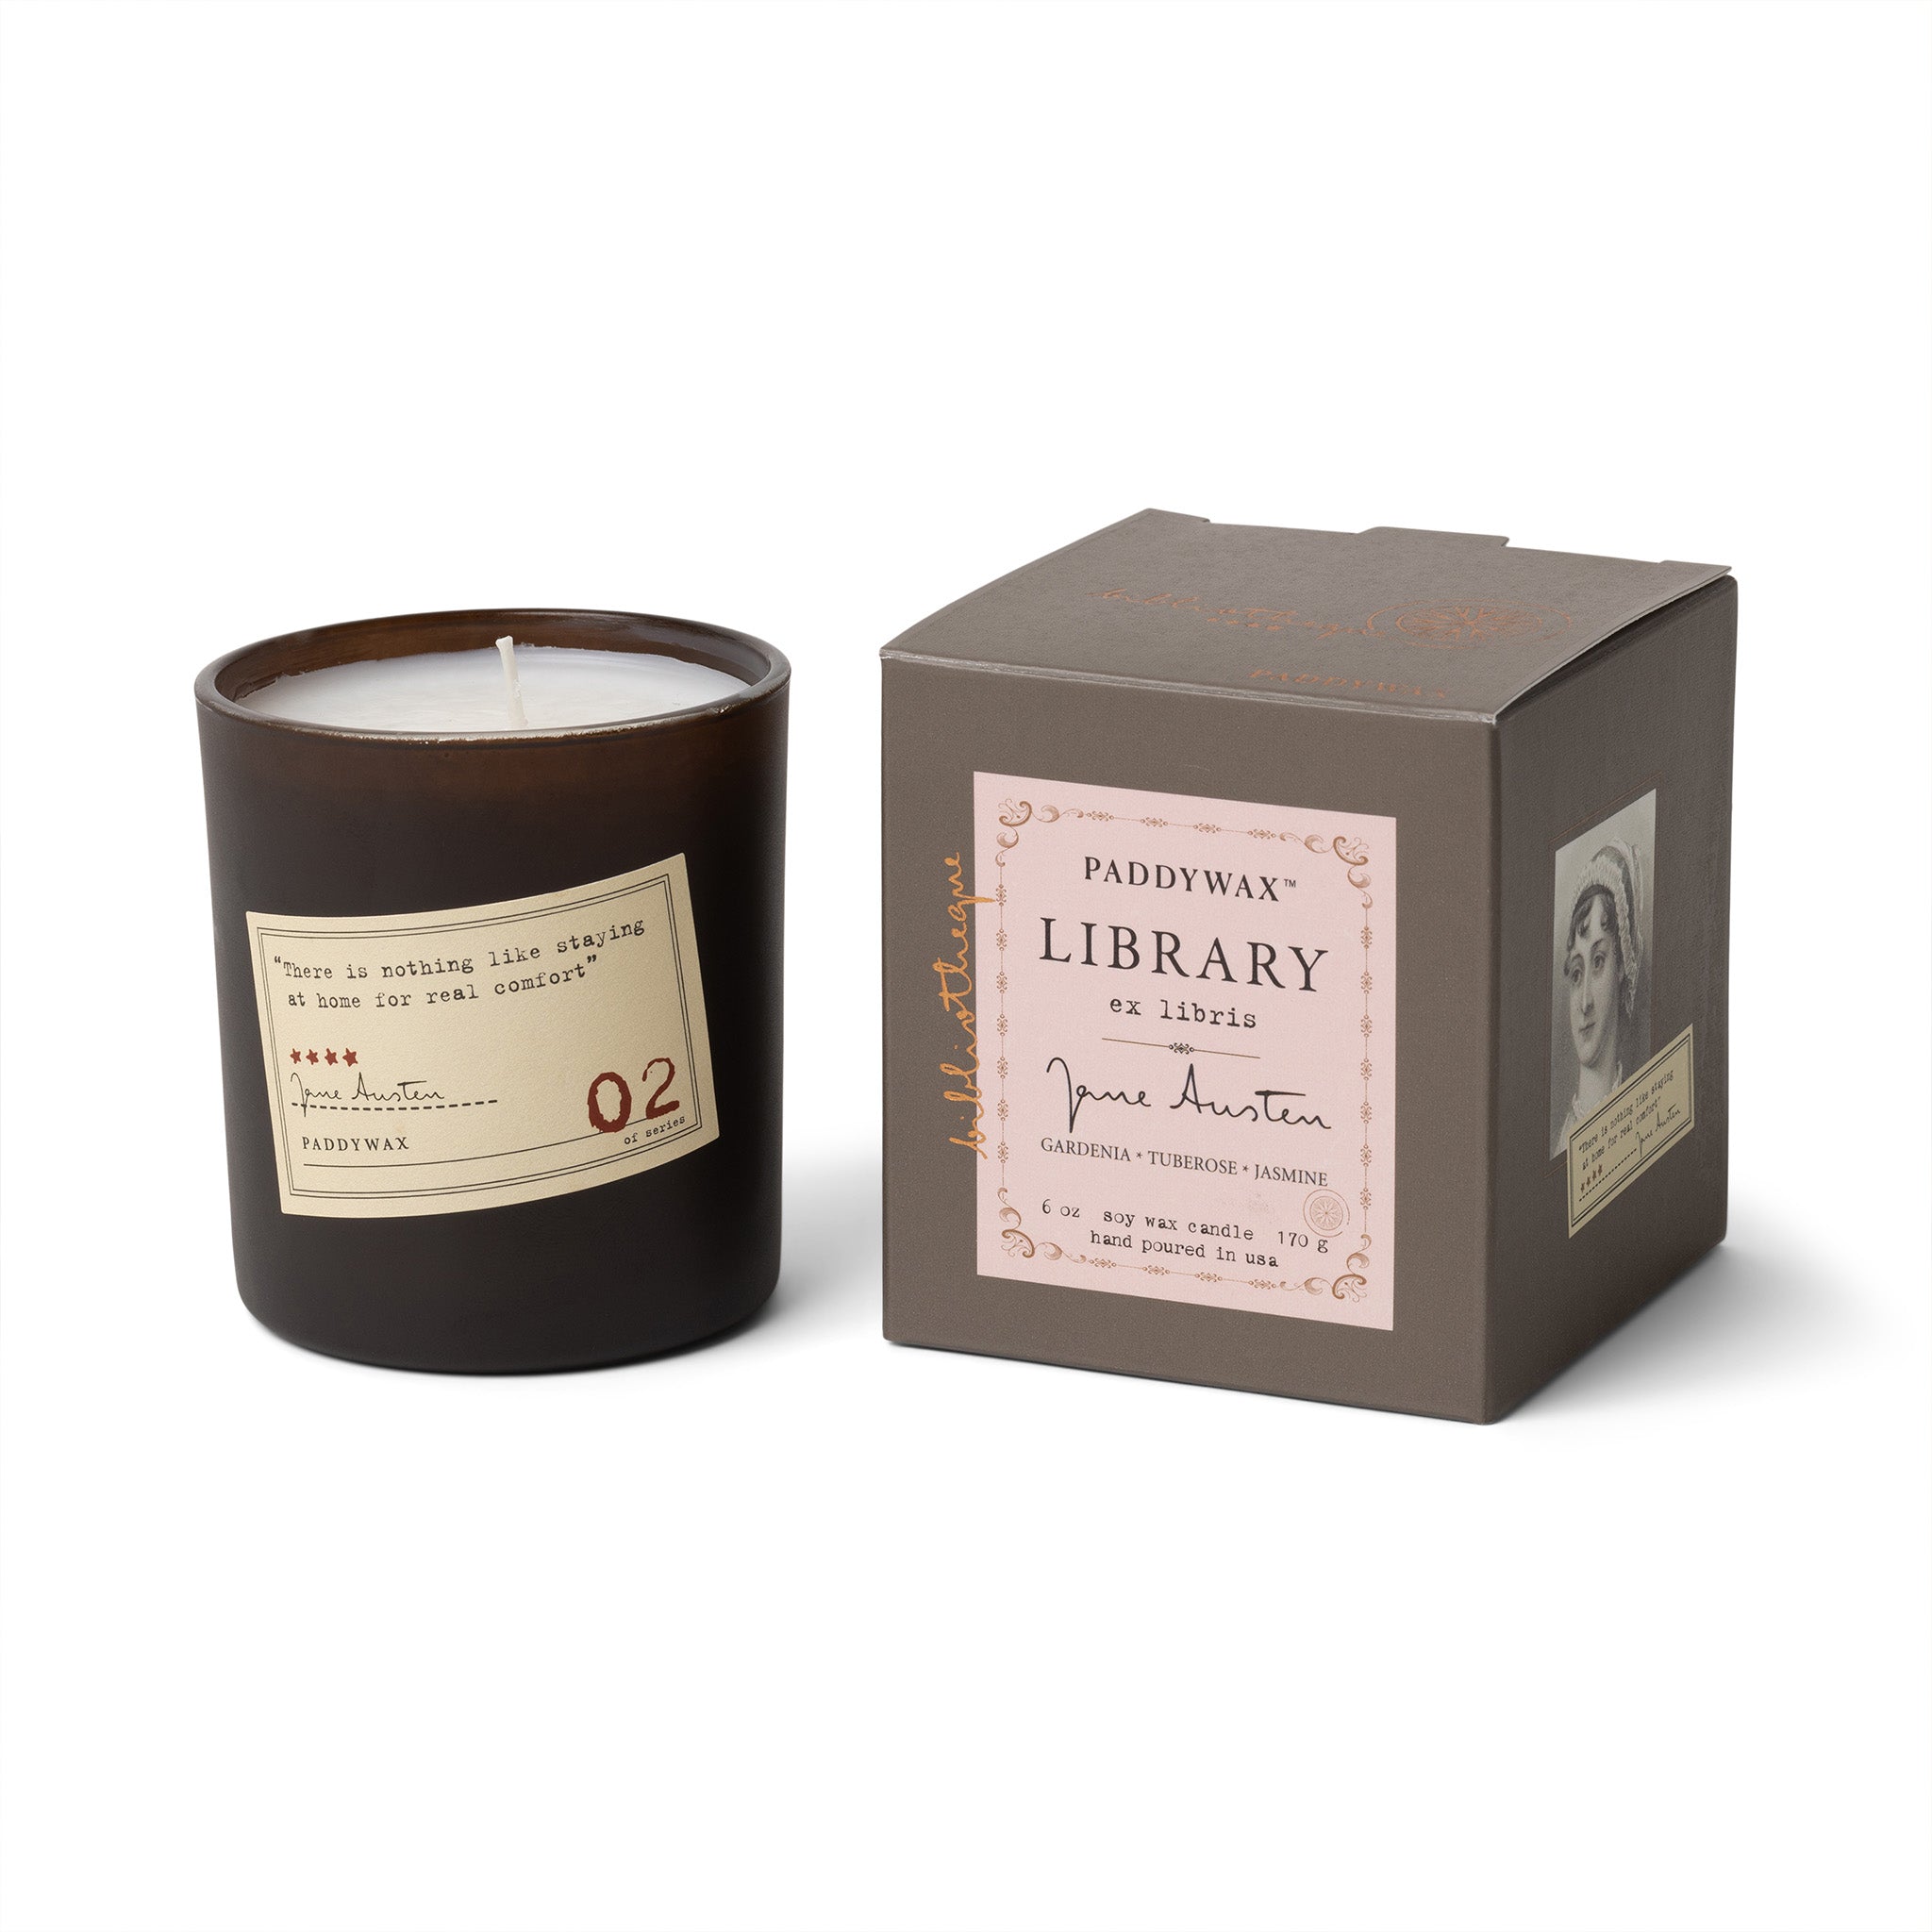 Jane Austen Candle, Book Lover Gift, Bookish Candle